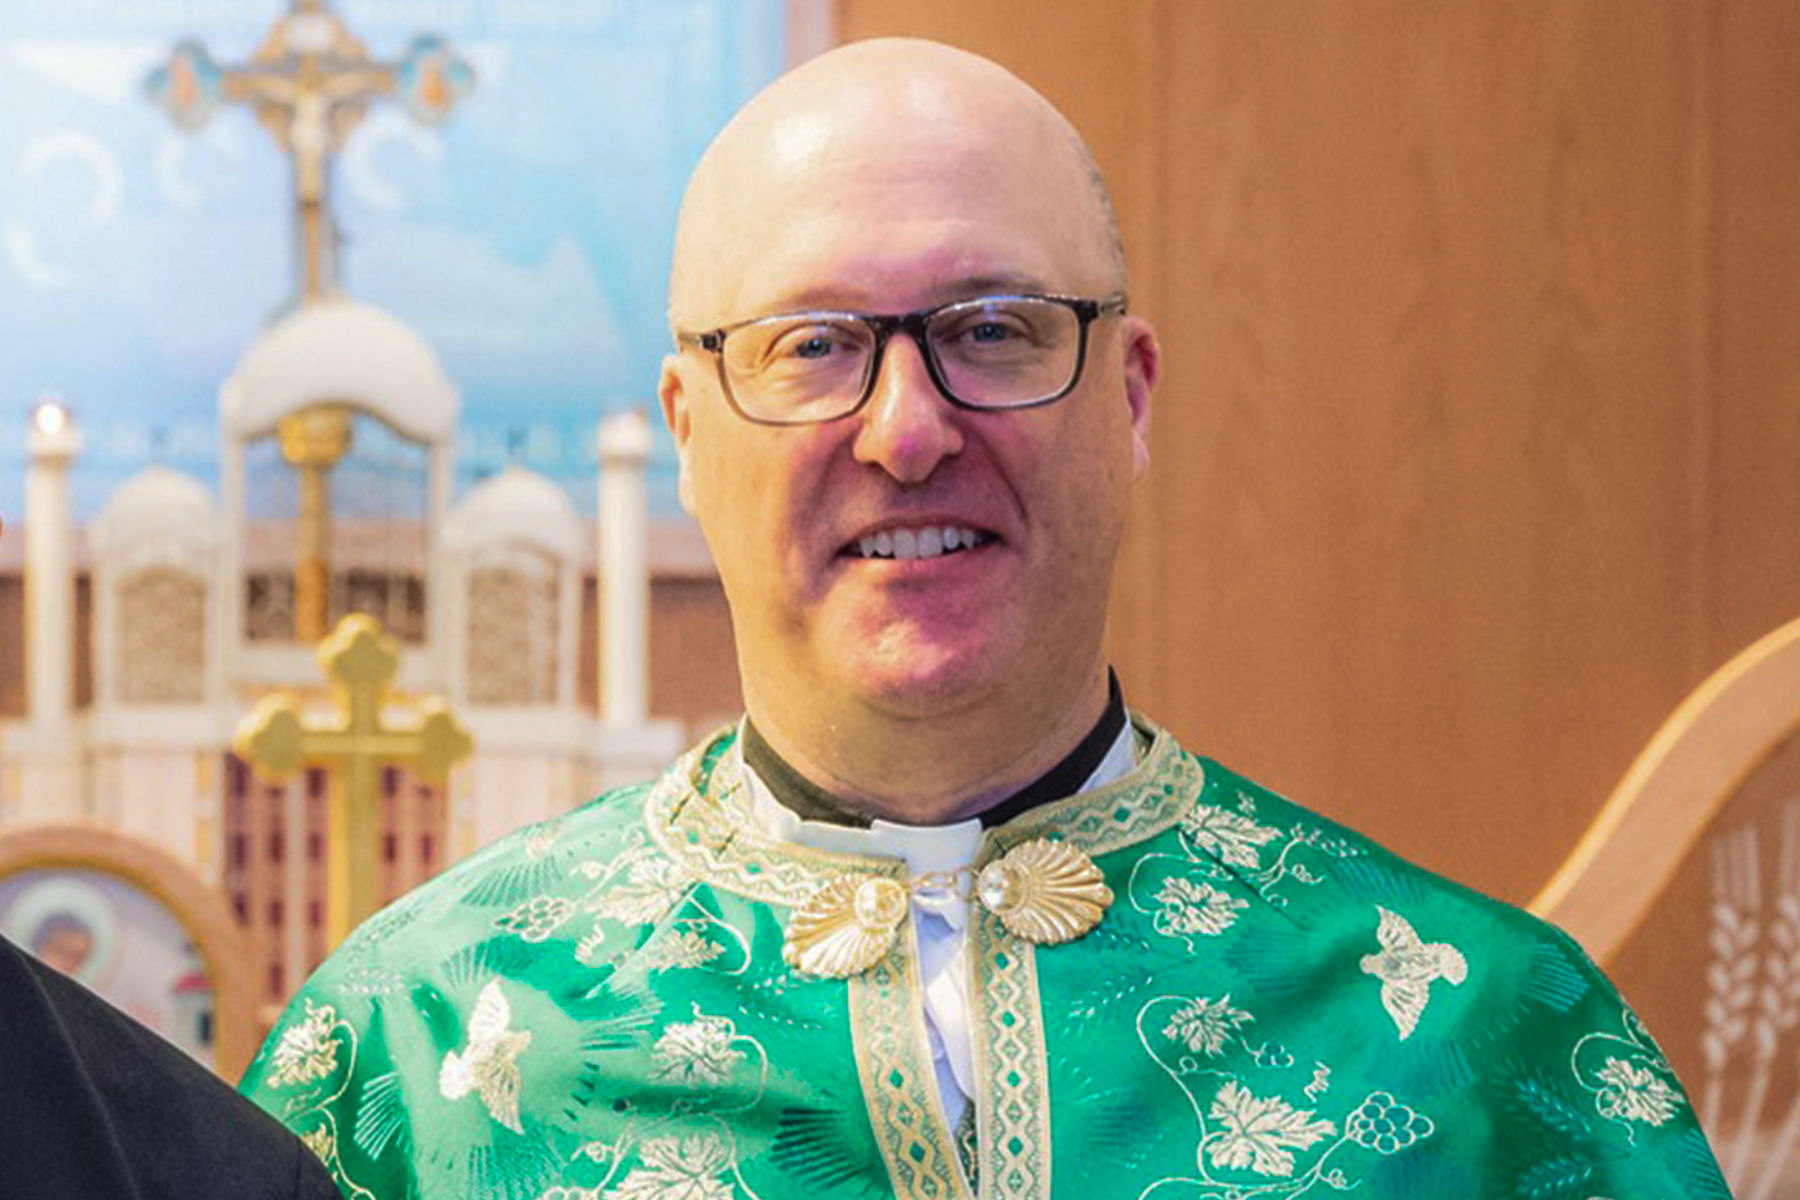 The episcopal ordination of Father Michael Smolinski will take place in January in Saskatoon